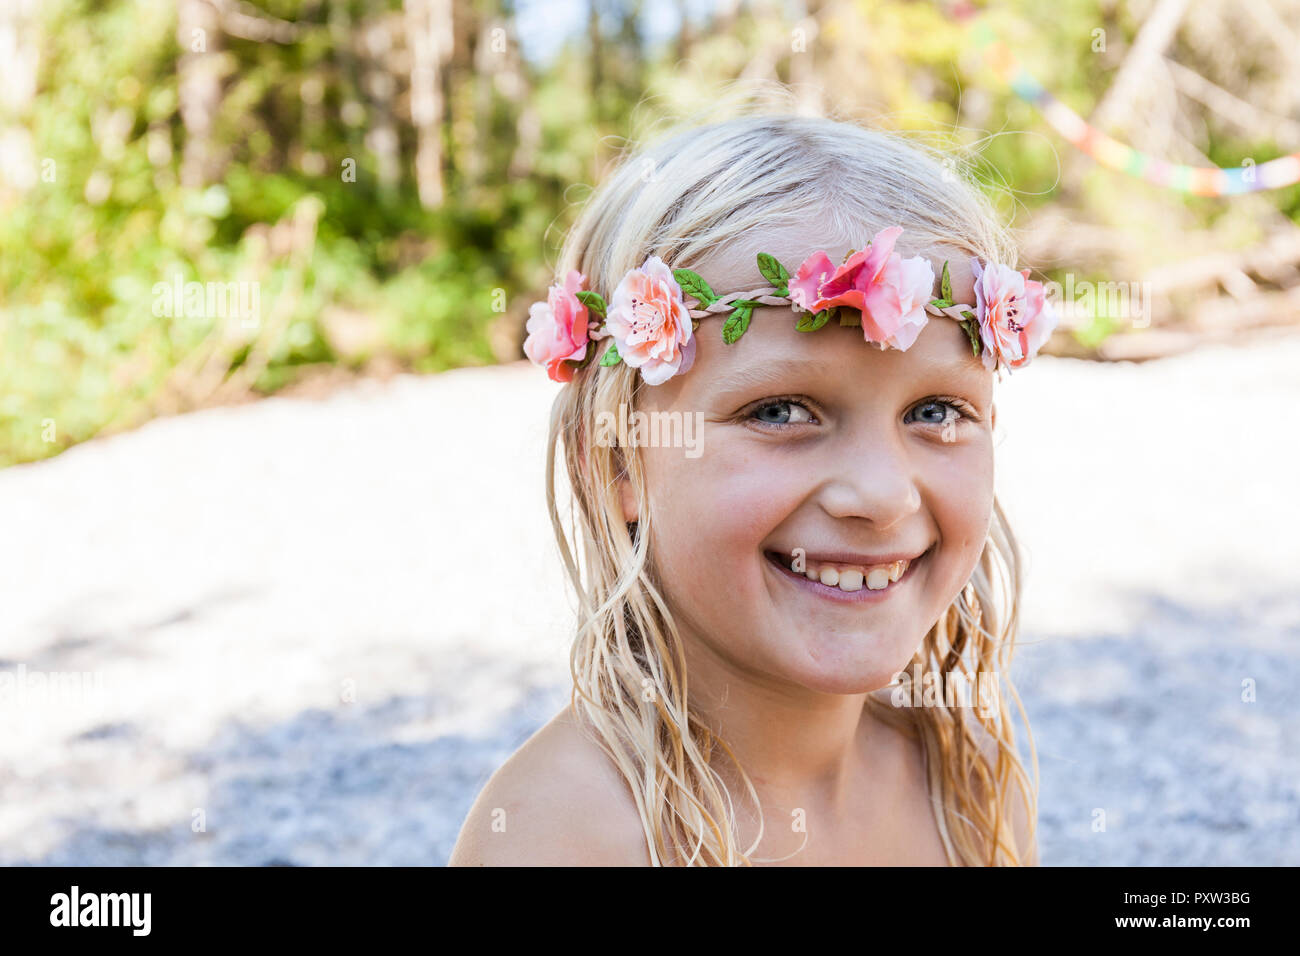 Portrait of happy girl wearing flower crown outdoors in summer Stock Photo  - Alamy